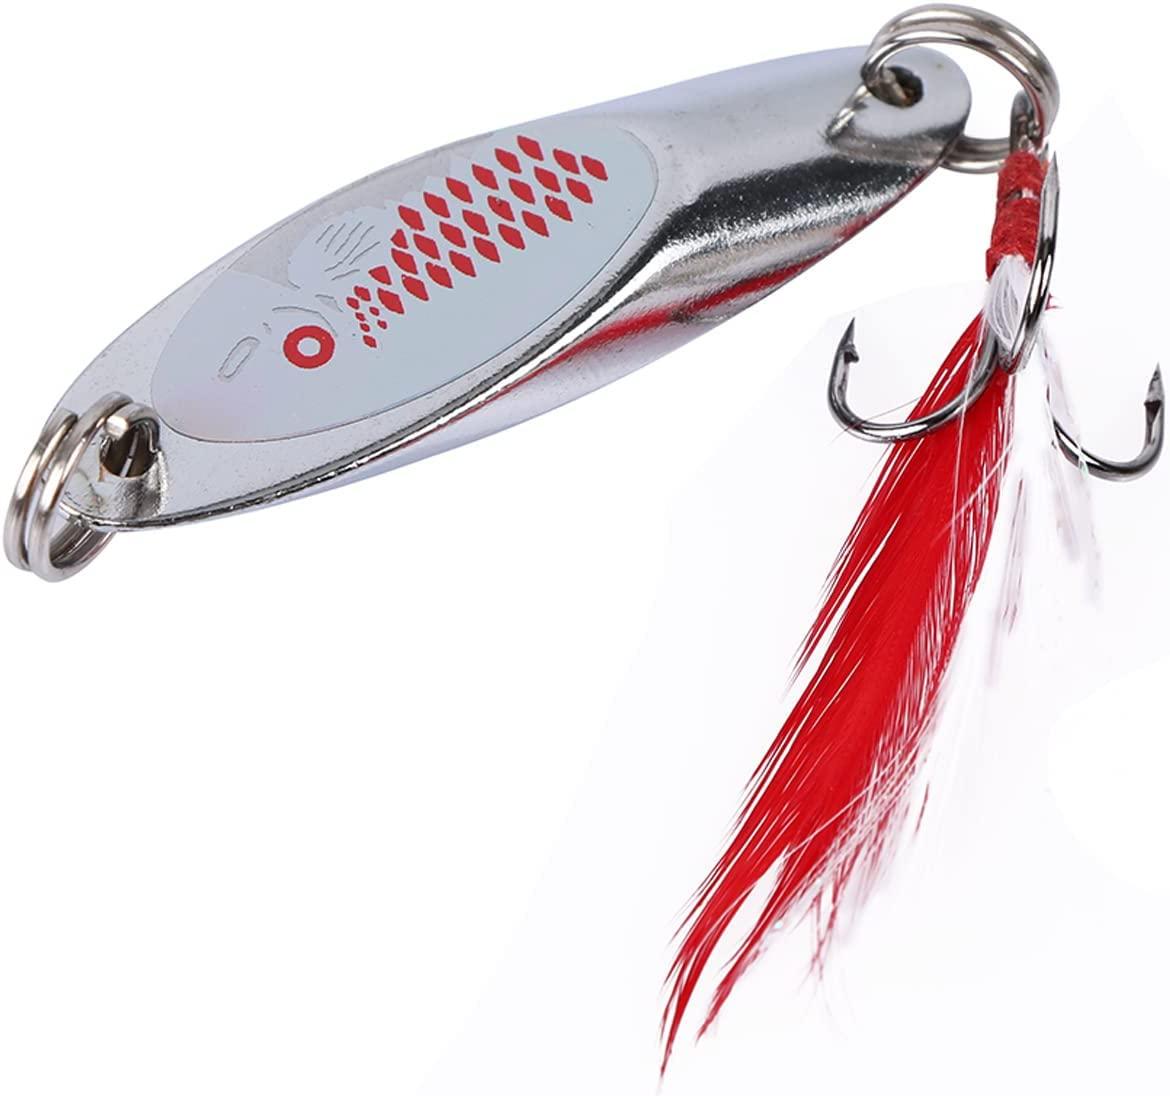 Gator Lures - 200LSS-1 2 oz. Stainless Steel Gator Spoon